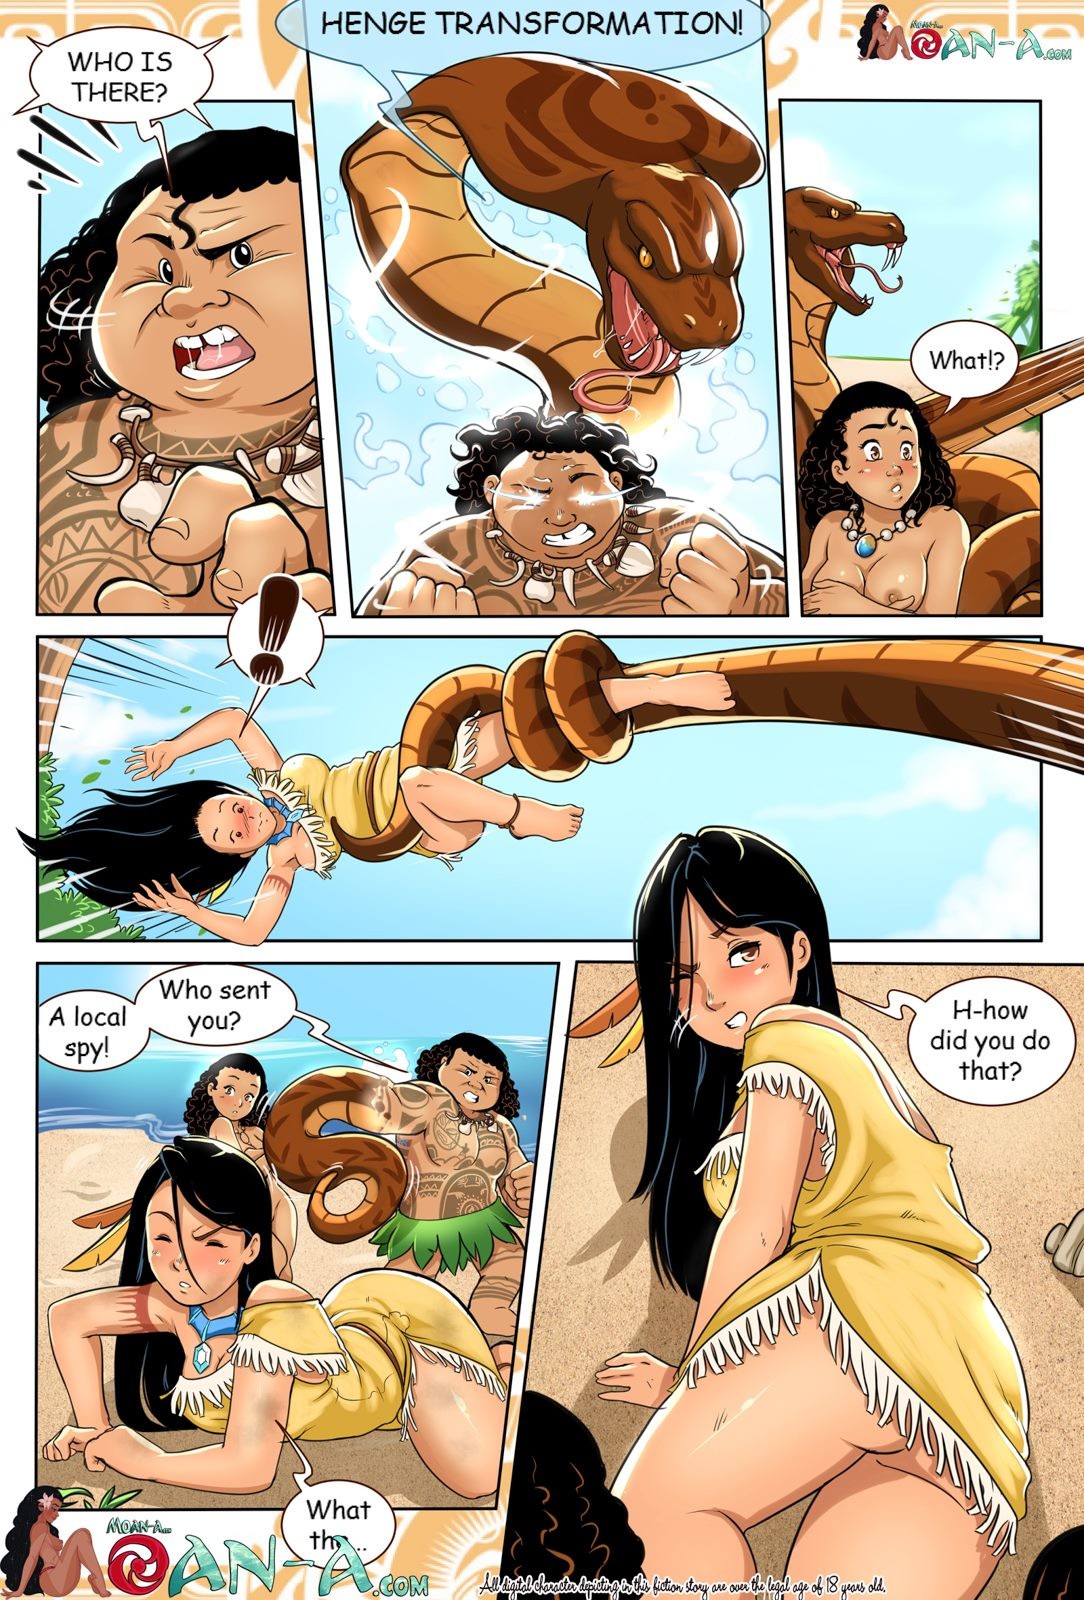 Moan-a Moana Lost - 2 porn comic picture 6